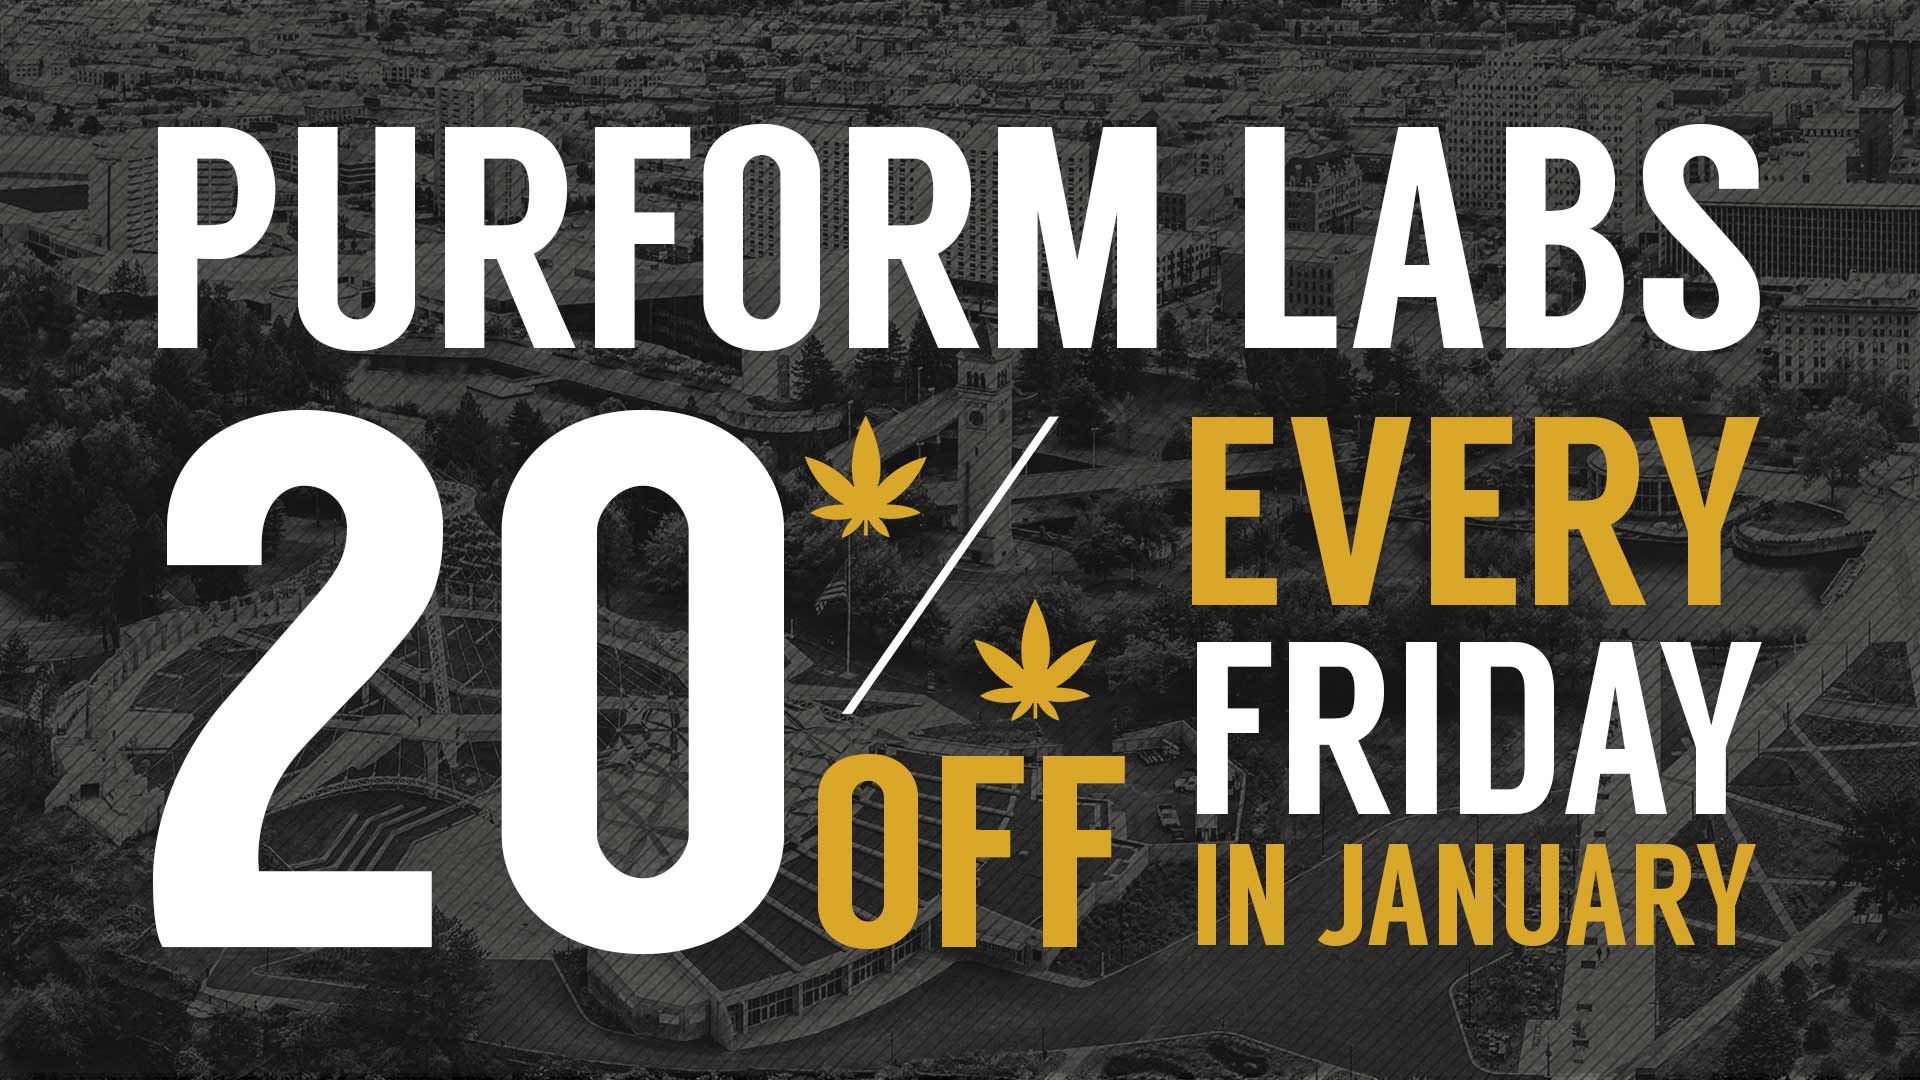 20% off Purform Labs Every Friday in January!